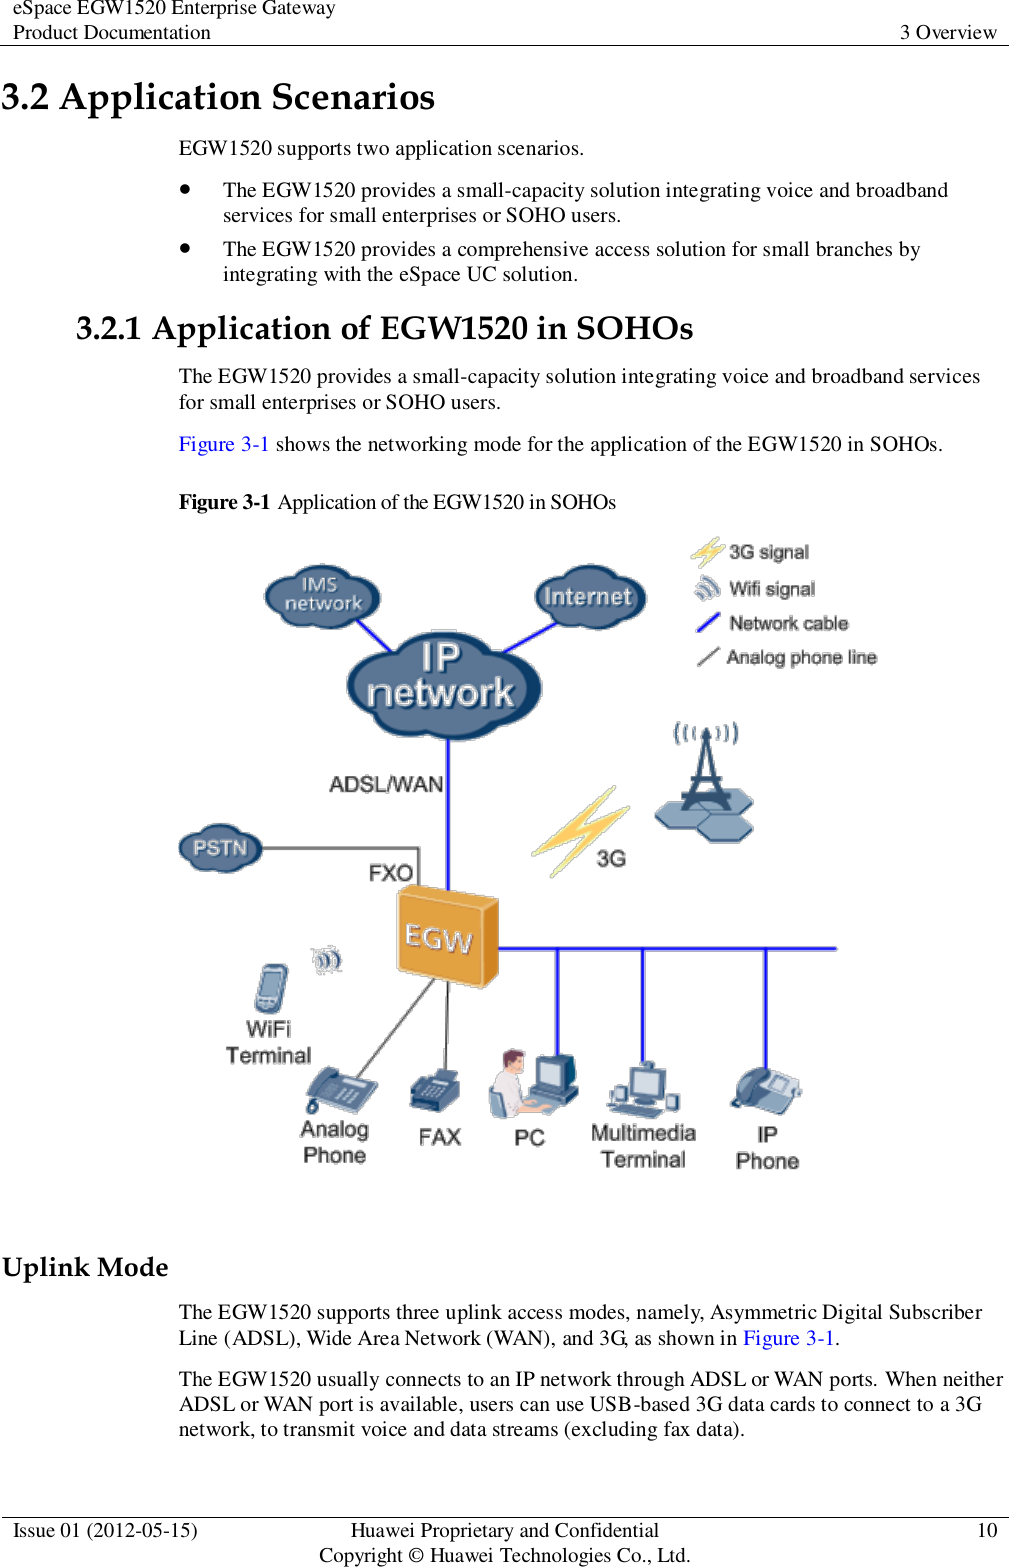 eSpace EGW1520 Enterprise Gateway Product Documentation 3 Overview  Issue 01 (2012-05-15) Huawei Proprietary and Confidential                                     Copyright © Huawei Technologies Co., Ltd. 10  3.2 Application Scenarios EGW1520 supports two application scenarios.  The EGW1520 provides a small-capacity solution integrating voice and broadband services for small enterprises or SOHO users.  The EGW1520 provides a comprehensive access solution for small branches by integrating with the eSpace UC solution. 3.2.1 Application of EGW1520 in SOHOs The EGW1520 provides a small-capacity solution integrating voice and broadband services for small enterprises or SOHO users. Figure 3-1 shows the networking mode for the application of the EGW1520 in SOHOs. Figure 3-1 Application of the EGW1520 in SOHOs   Uplink Mode The EGW1520 supports three uplink access modes, namely, Asymmetric Digital Subscriber Line (ADSL), Wide Area Network (WAN), and 3G, as shown in Figure 3-1. The EGW1520 usually connects to an IP network through ADSL or WAN ports. When neither ADSL or WAN port is available, users can use USB-based 3G data cards to connect to a 3G network, to transmit voice and data streams (excluding fax data). 